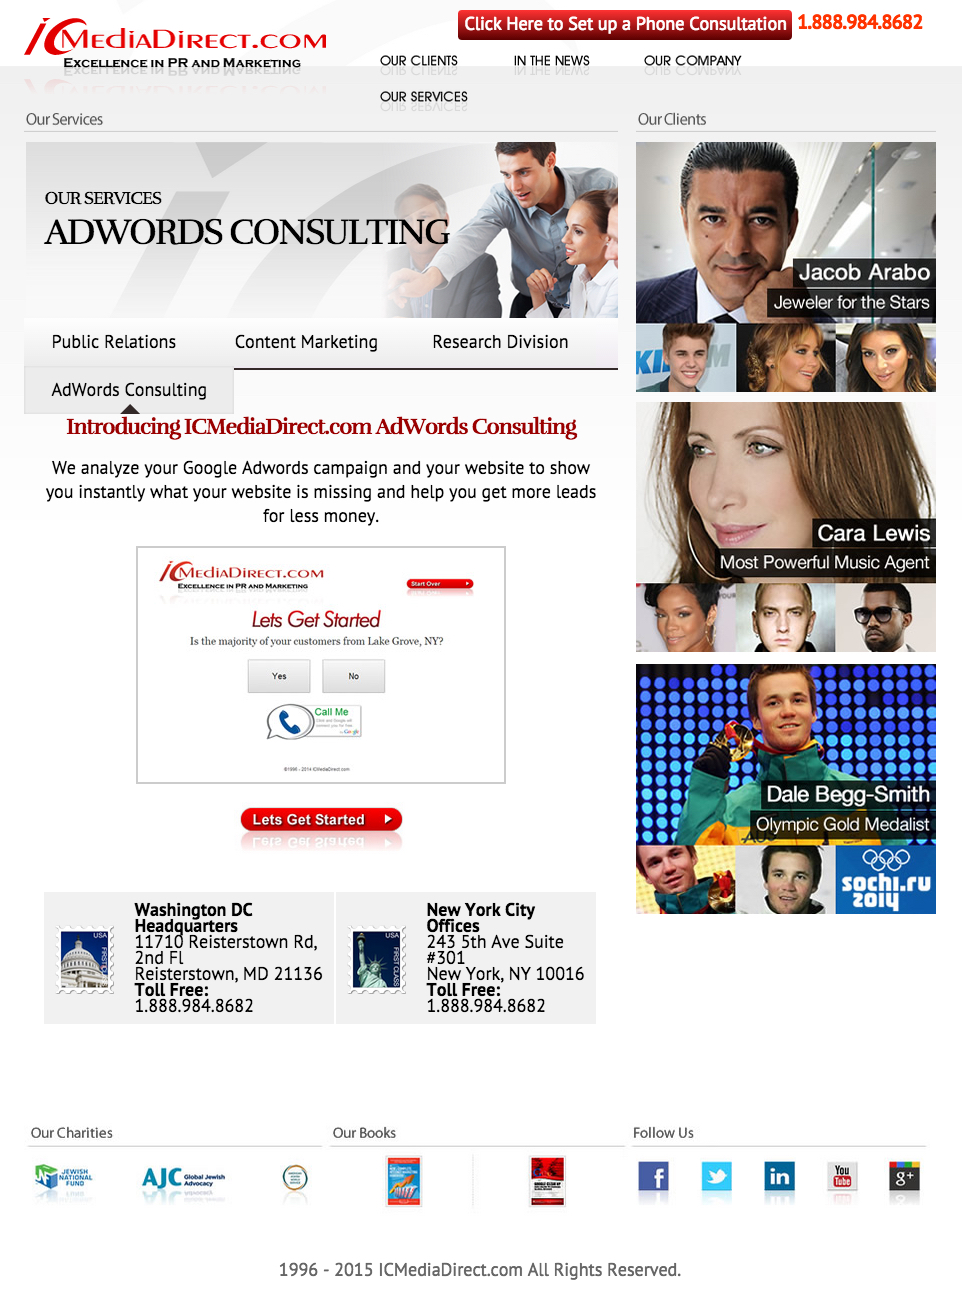 ICMediaDirect.com Reviews – Their Advanced AdWords Consulting Service